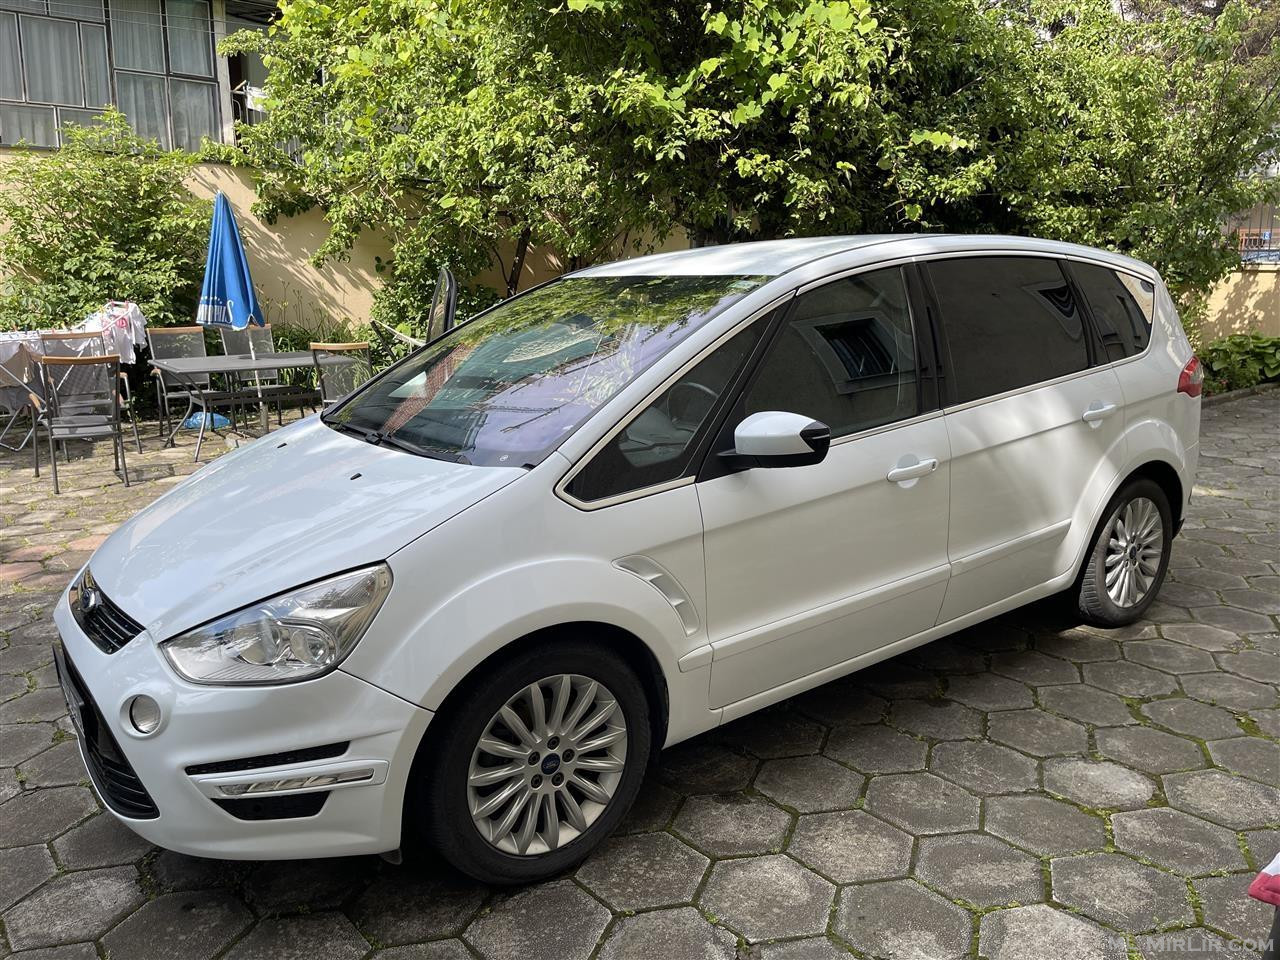 Ford Smax me 7 ulese